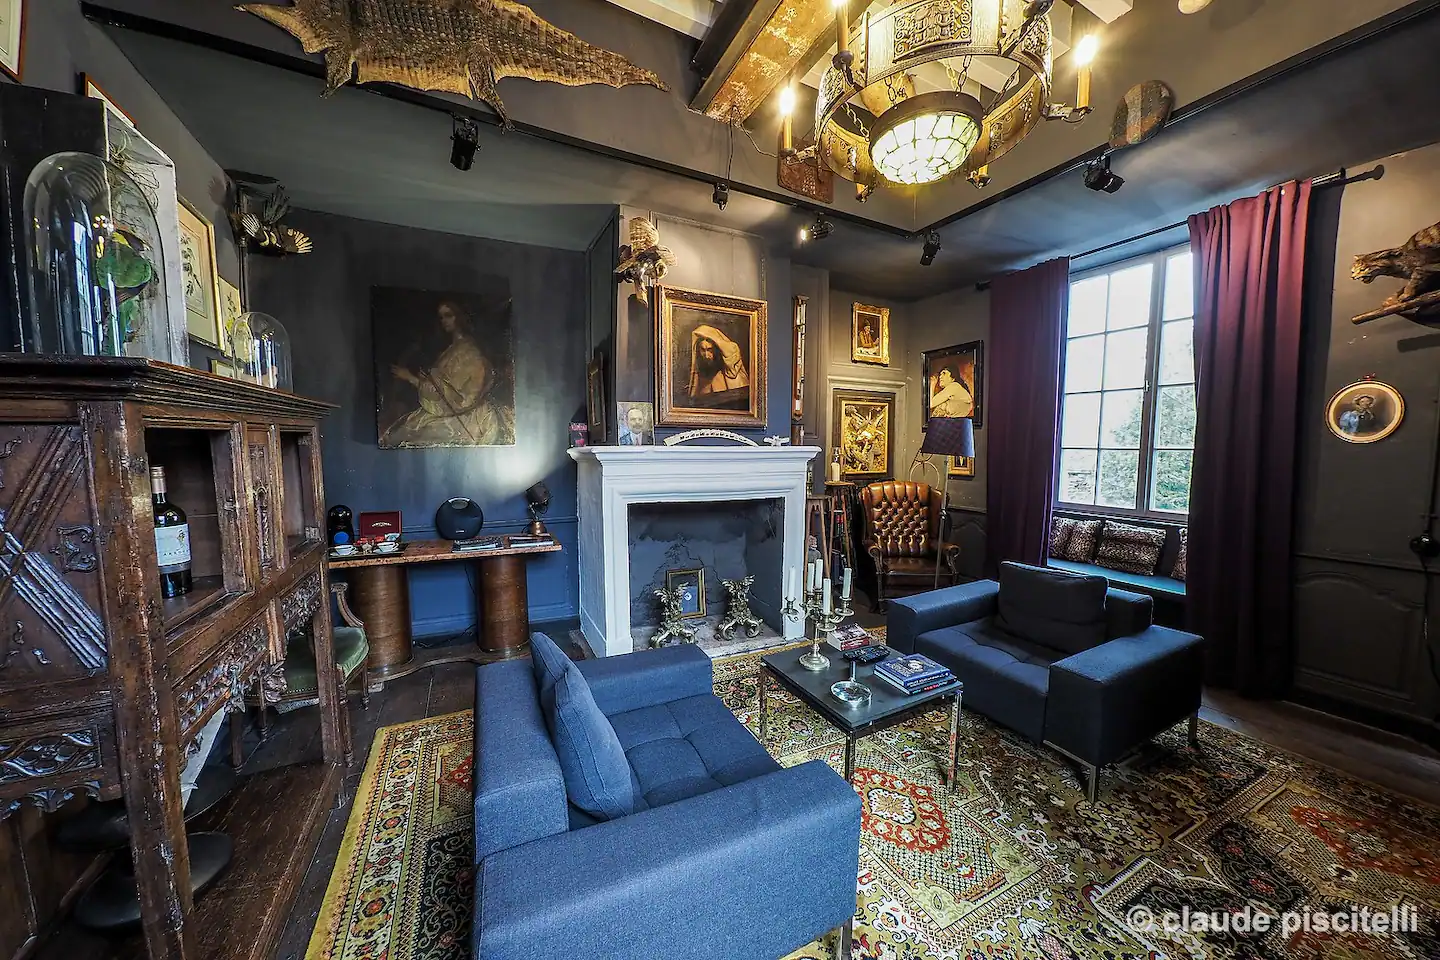 A sophisticated living room with antique décor and a charming fireplace.